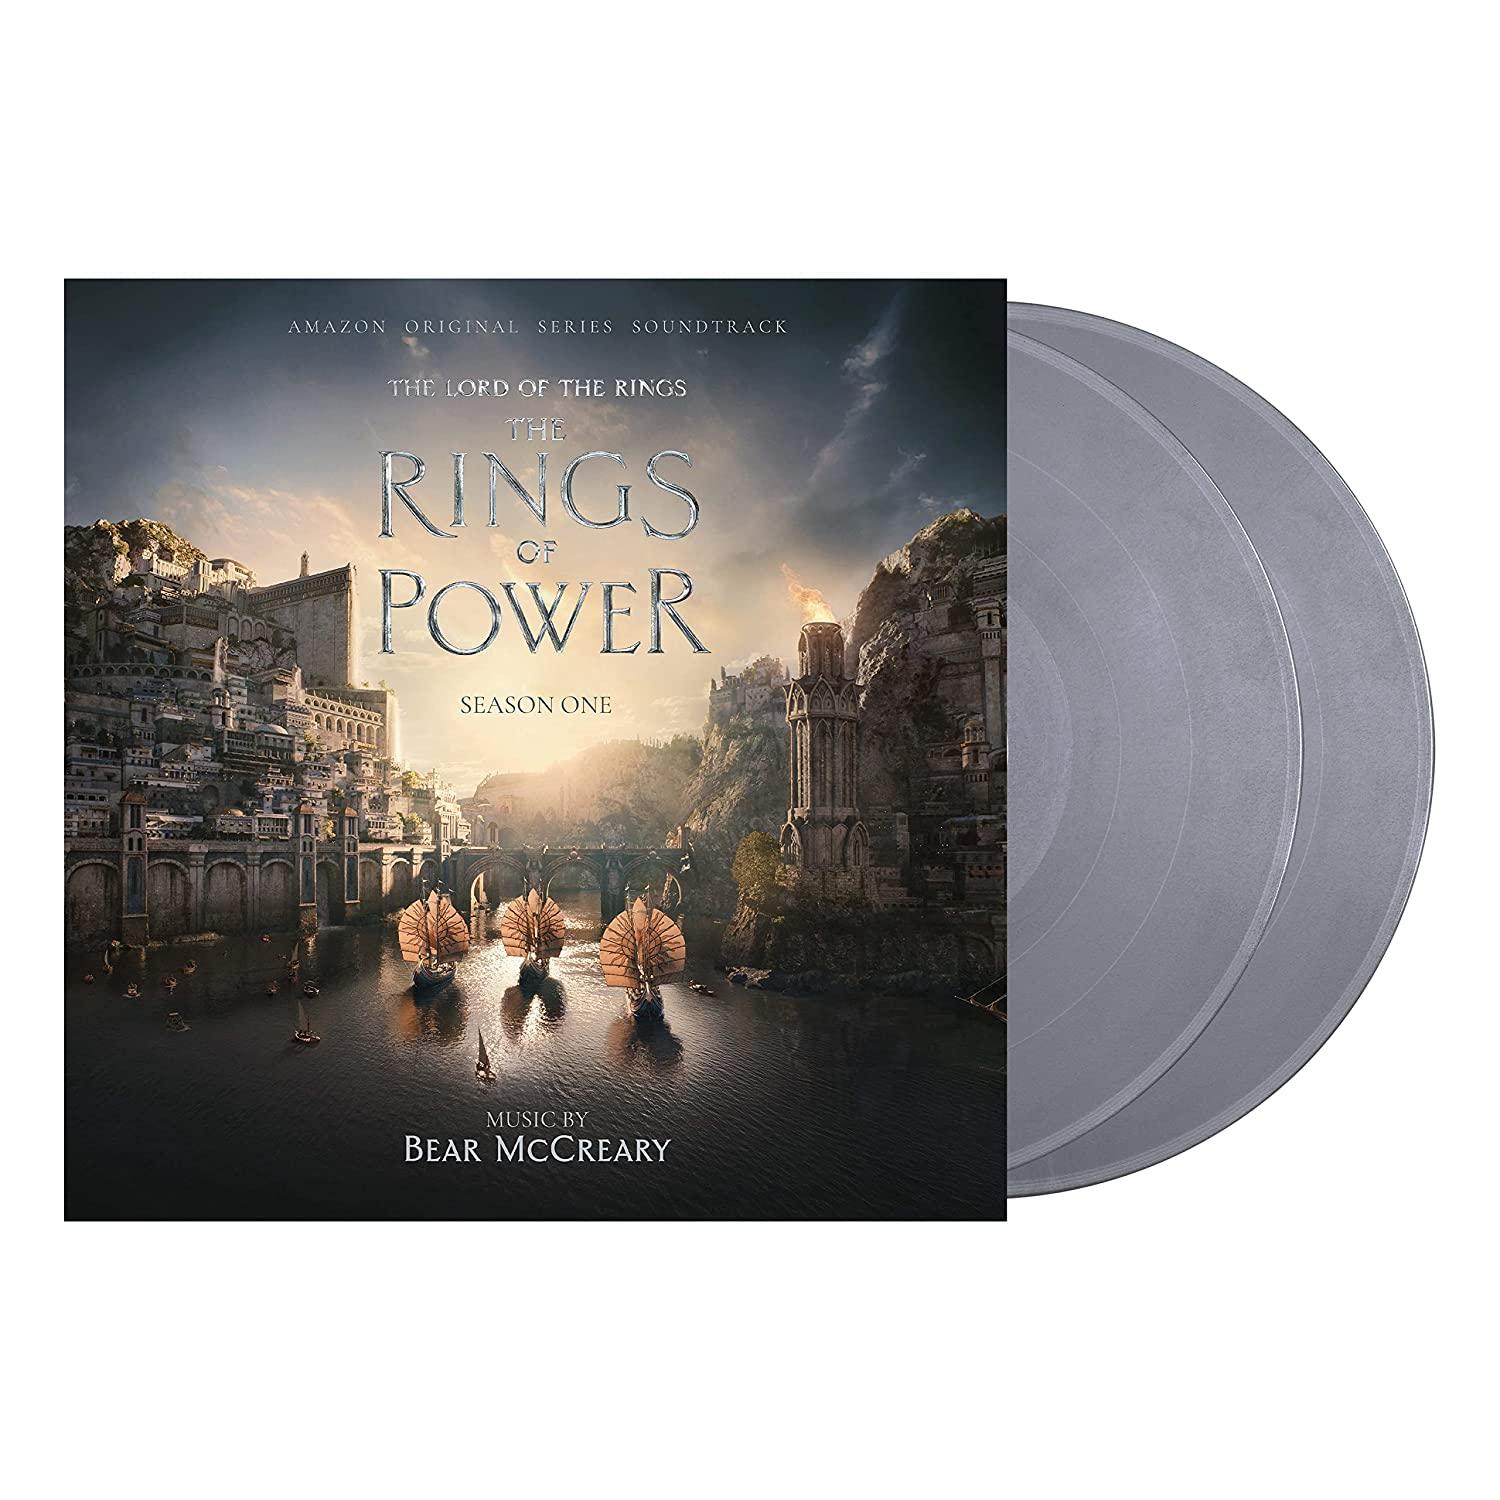 The Lord of The Rings: The Rings of Power – Soundtrack Season One (Vinyl 2 LP)